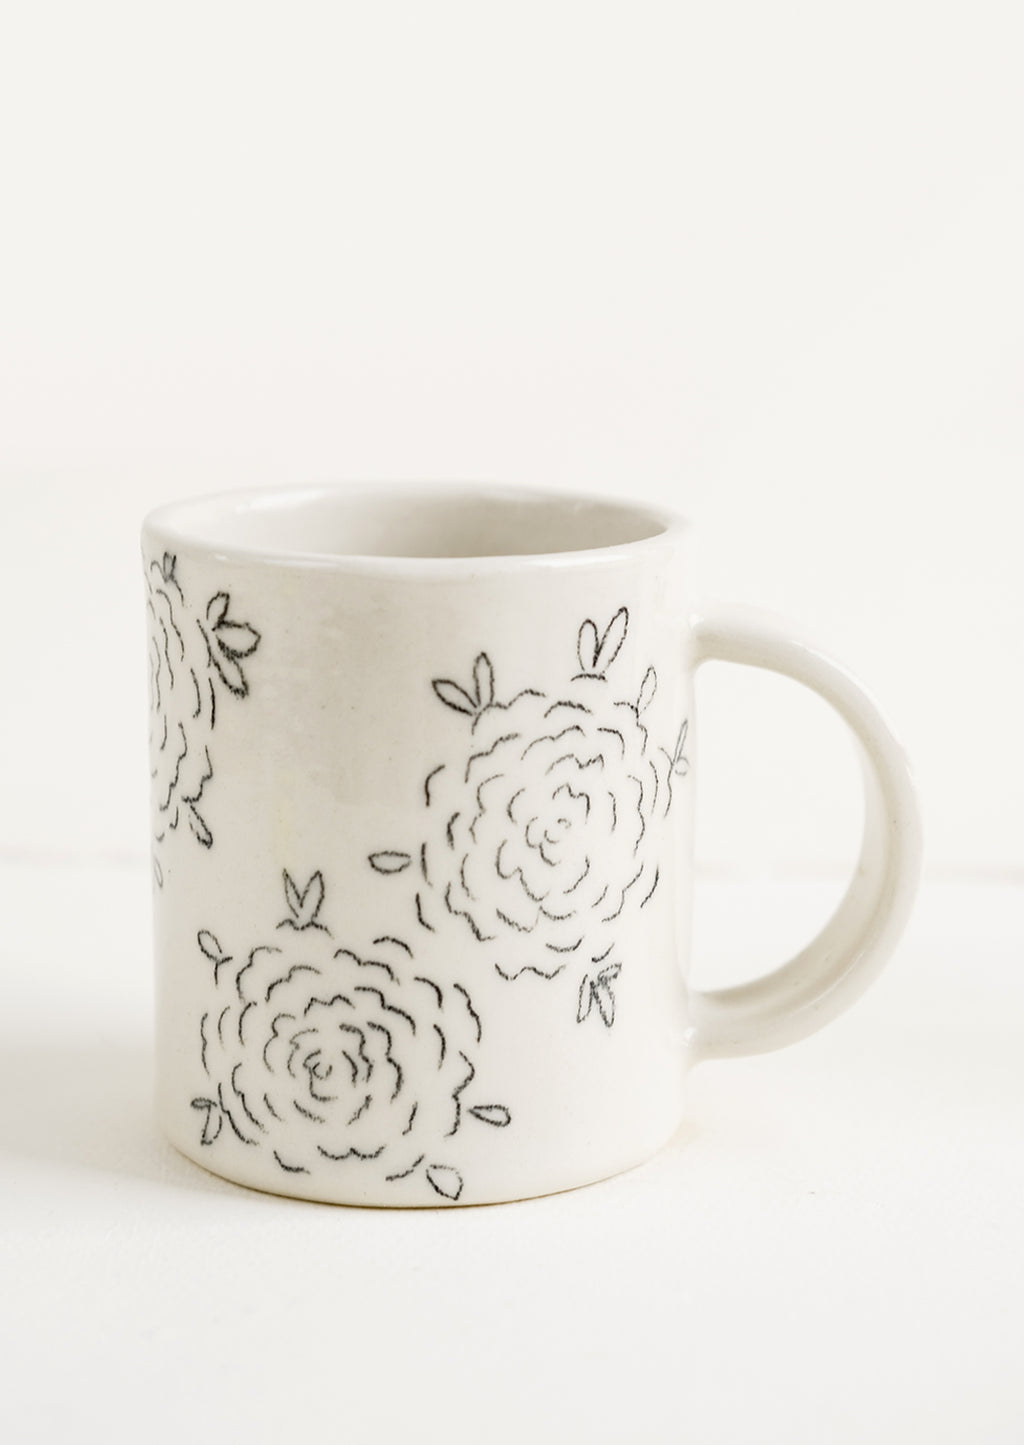 Line Drawing Floral: A handmade ceramic mug with white background and hand-painted floral line drawing print in black.